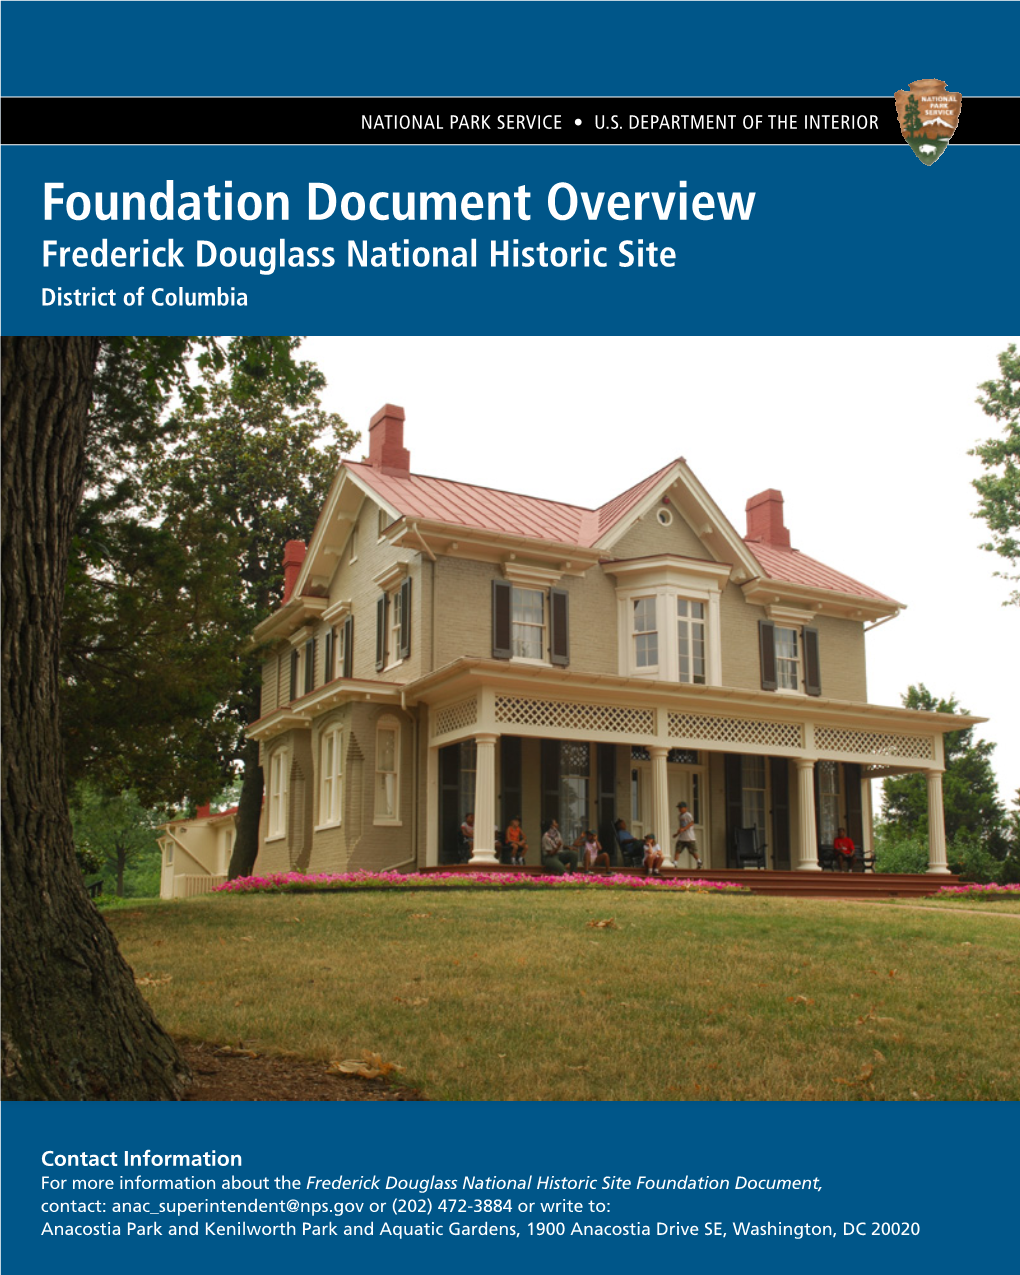 Frederick Douglass National Historic Site Foundation Document Overview